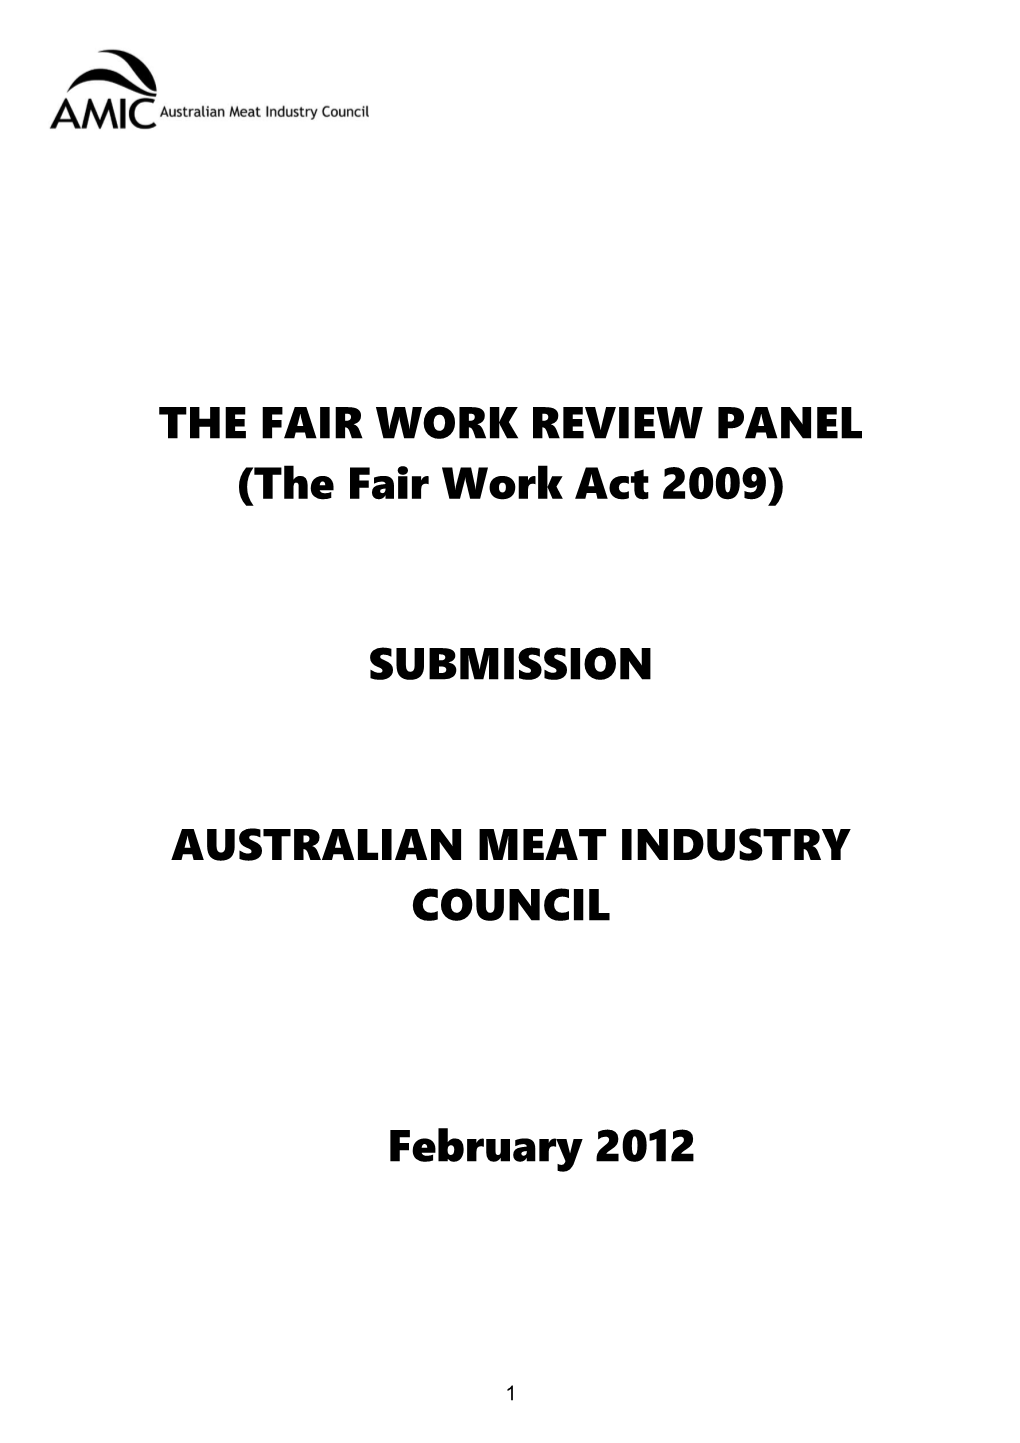 The Fair Work Review Panel